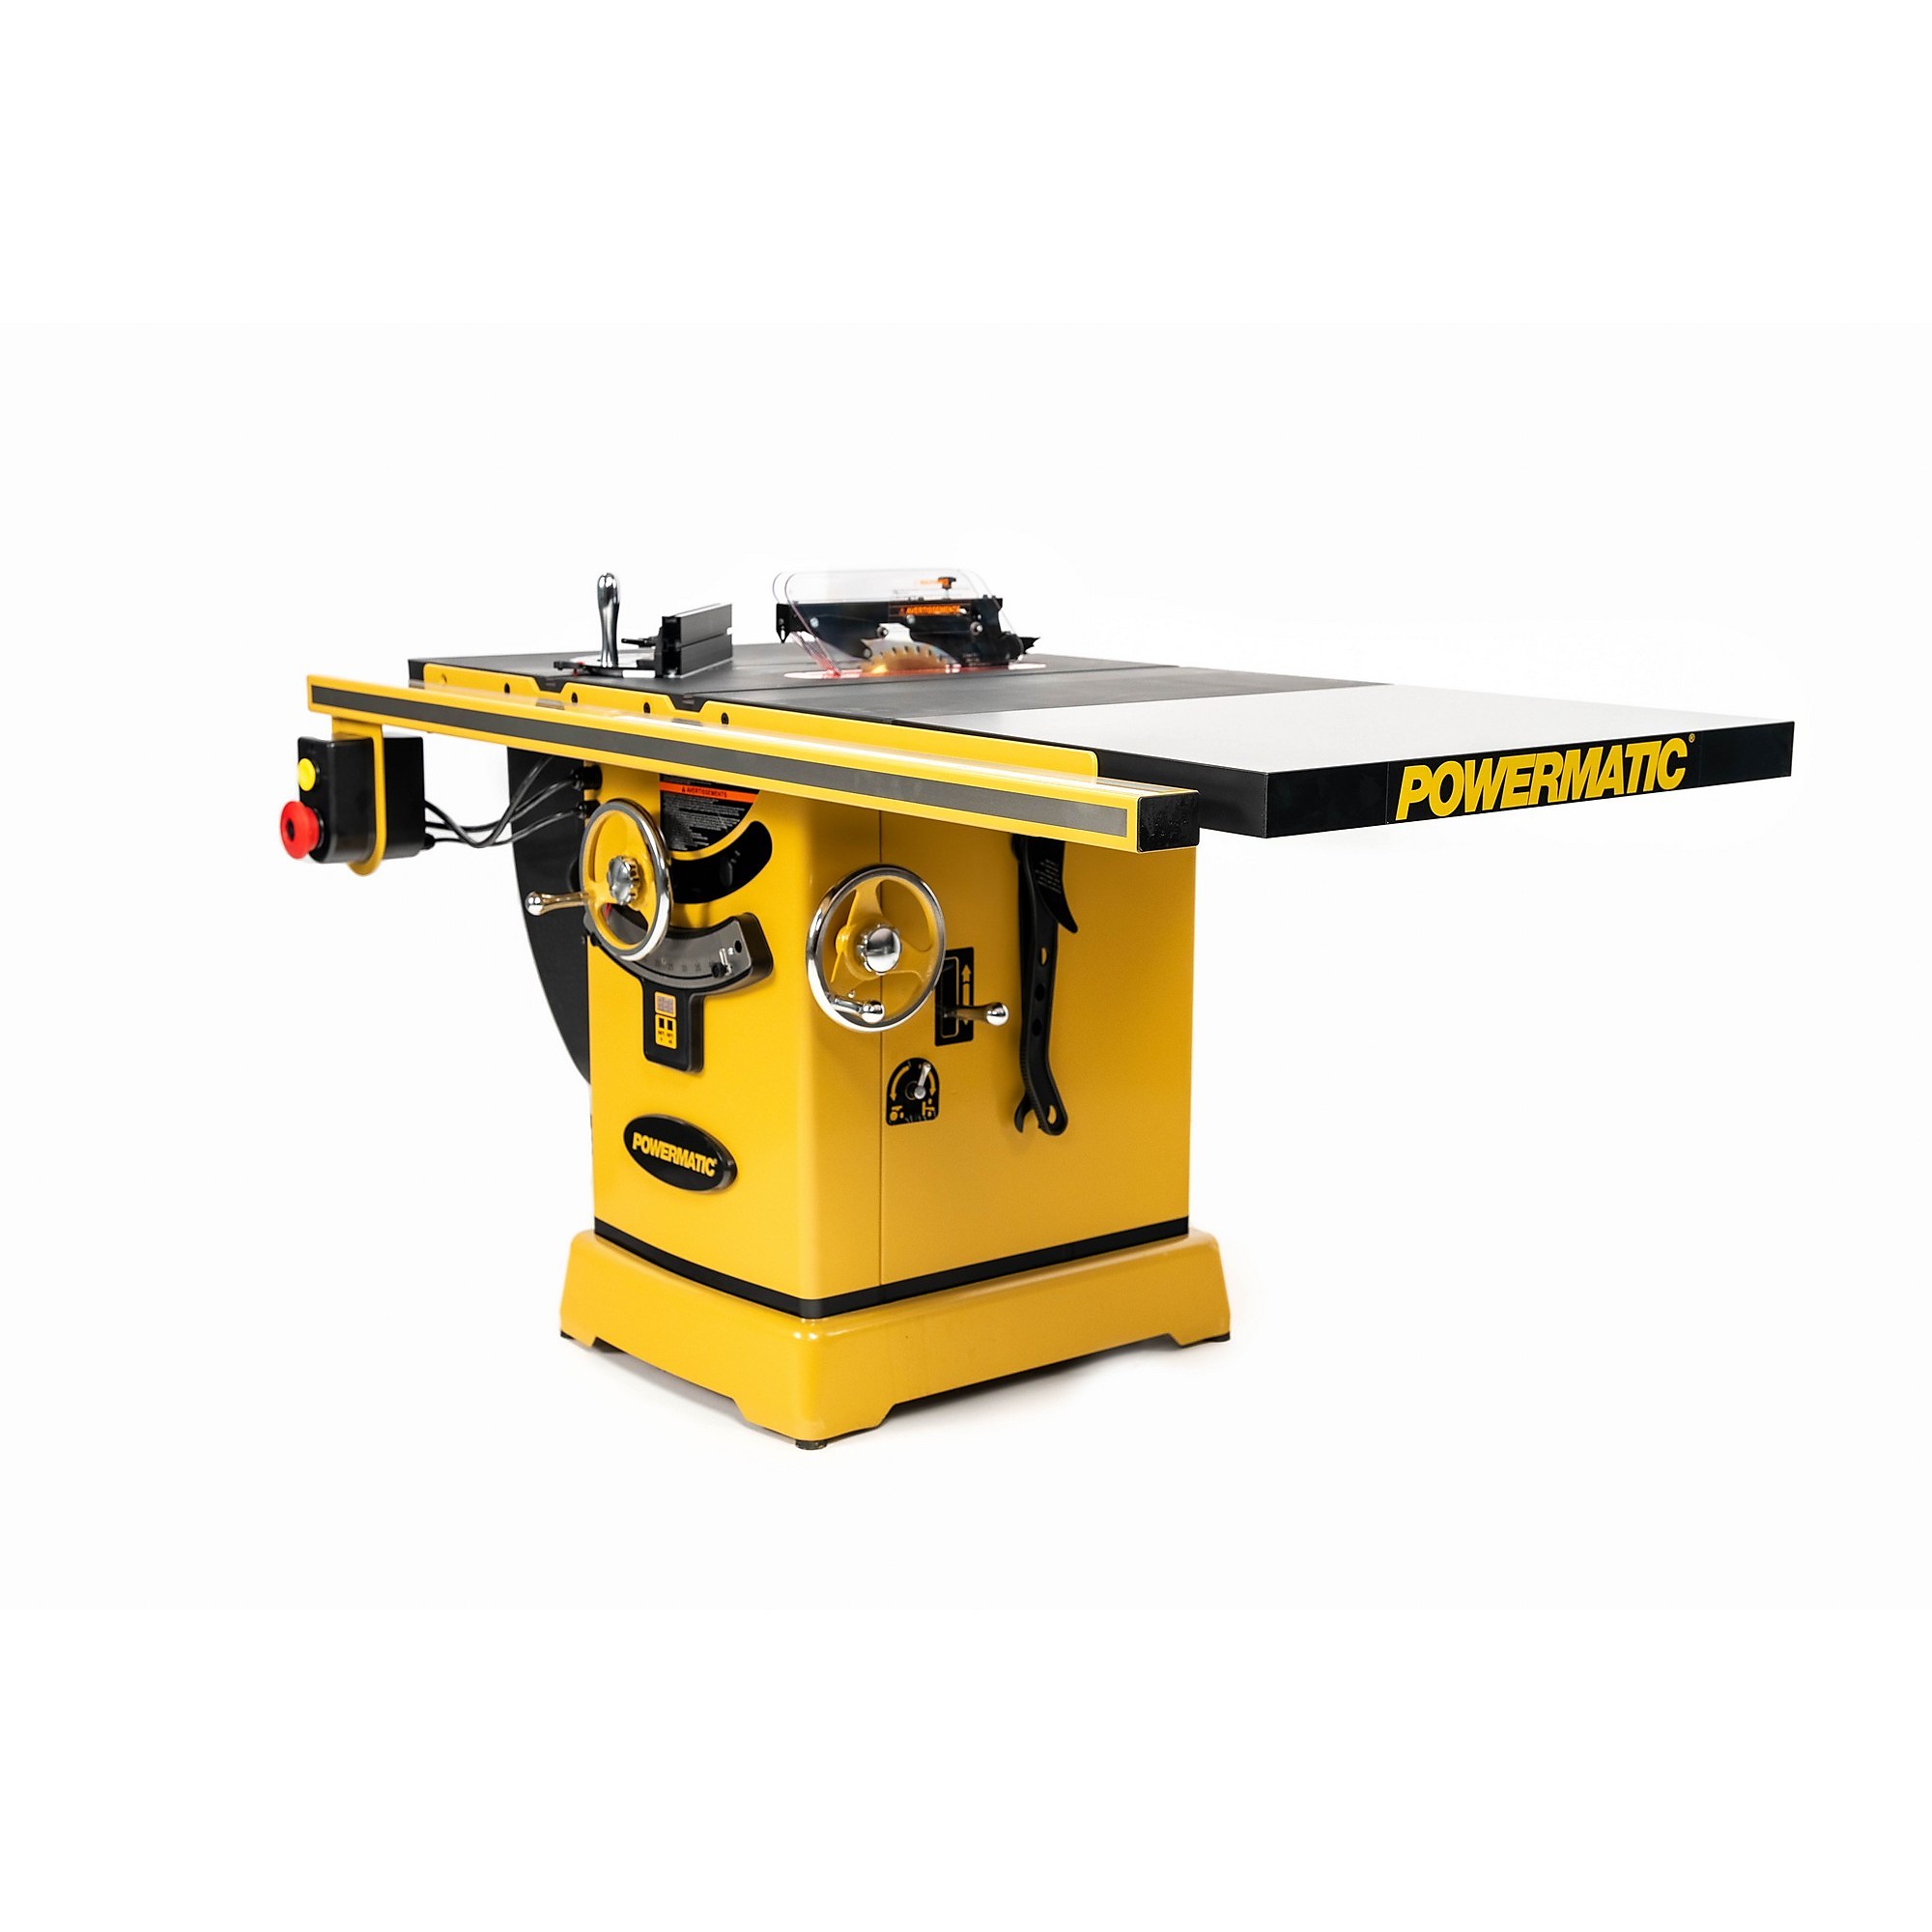 Powermatic, ArmorGlide Table Saw, Blade Diameter 10 Horsepower 1.75 HP, Volts 115 Model PM1000T -  1791001KT